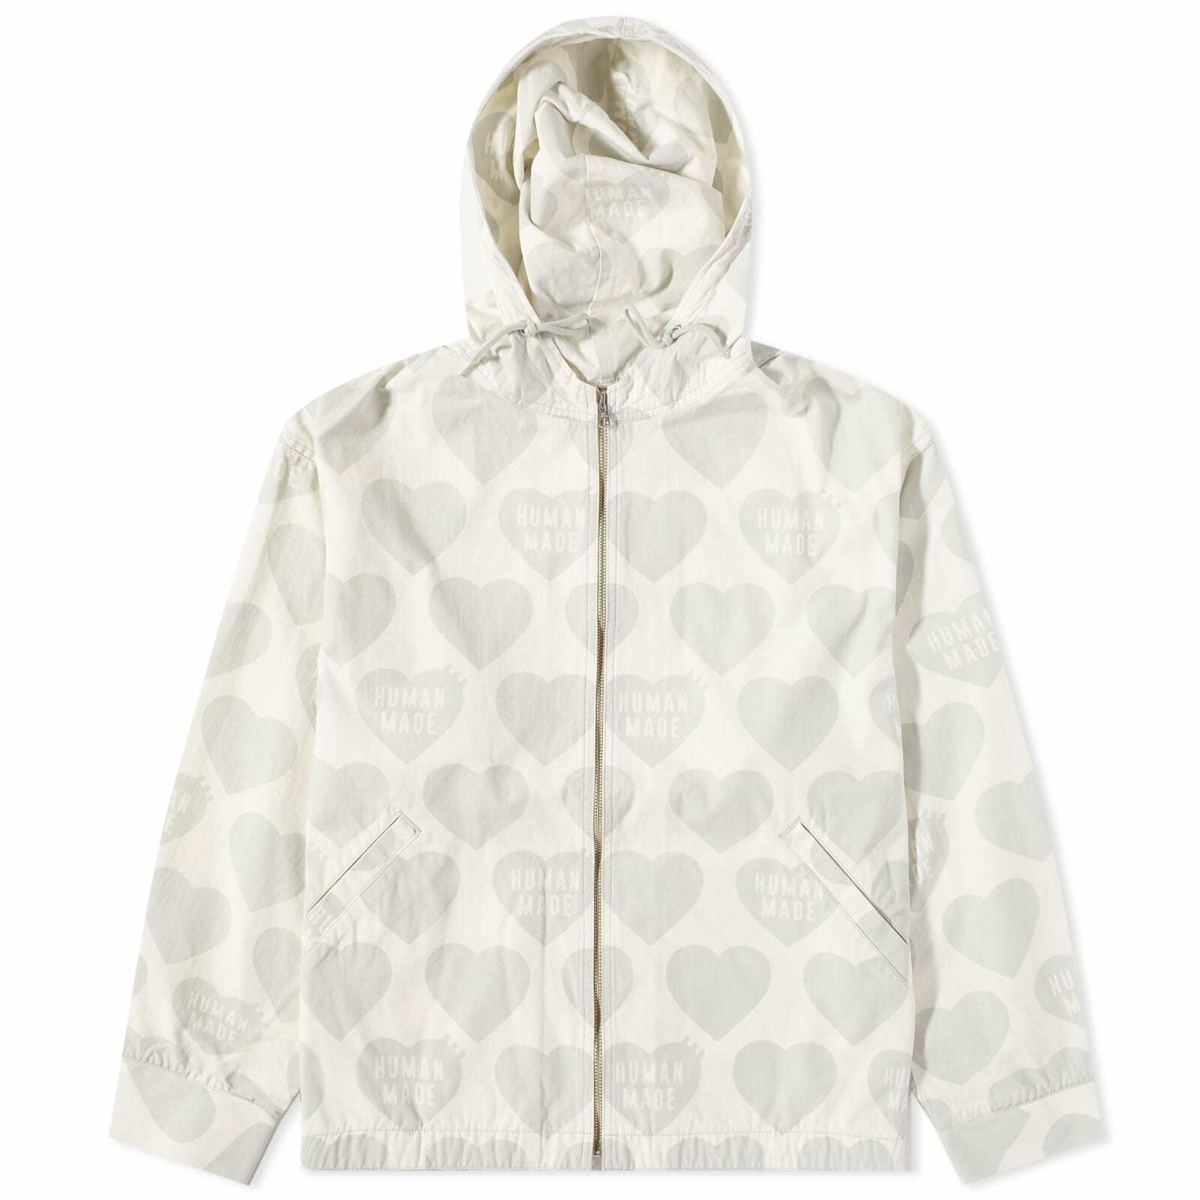 Human Made Men's Heart Zip-Up Parka Jacket in White